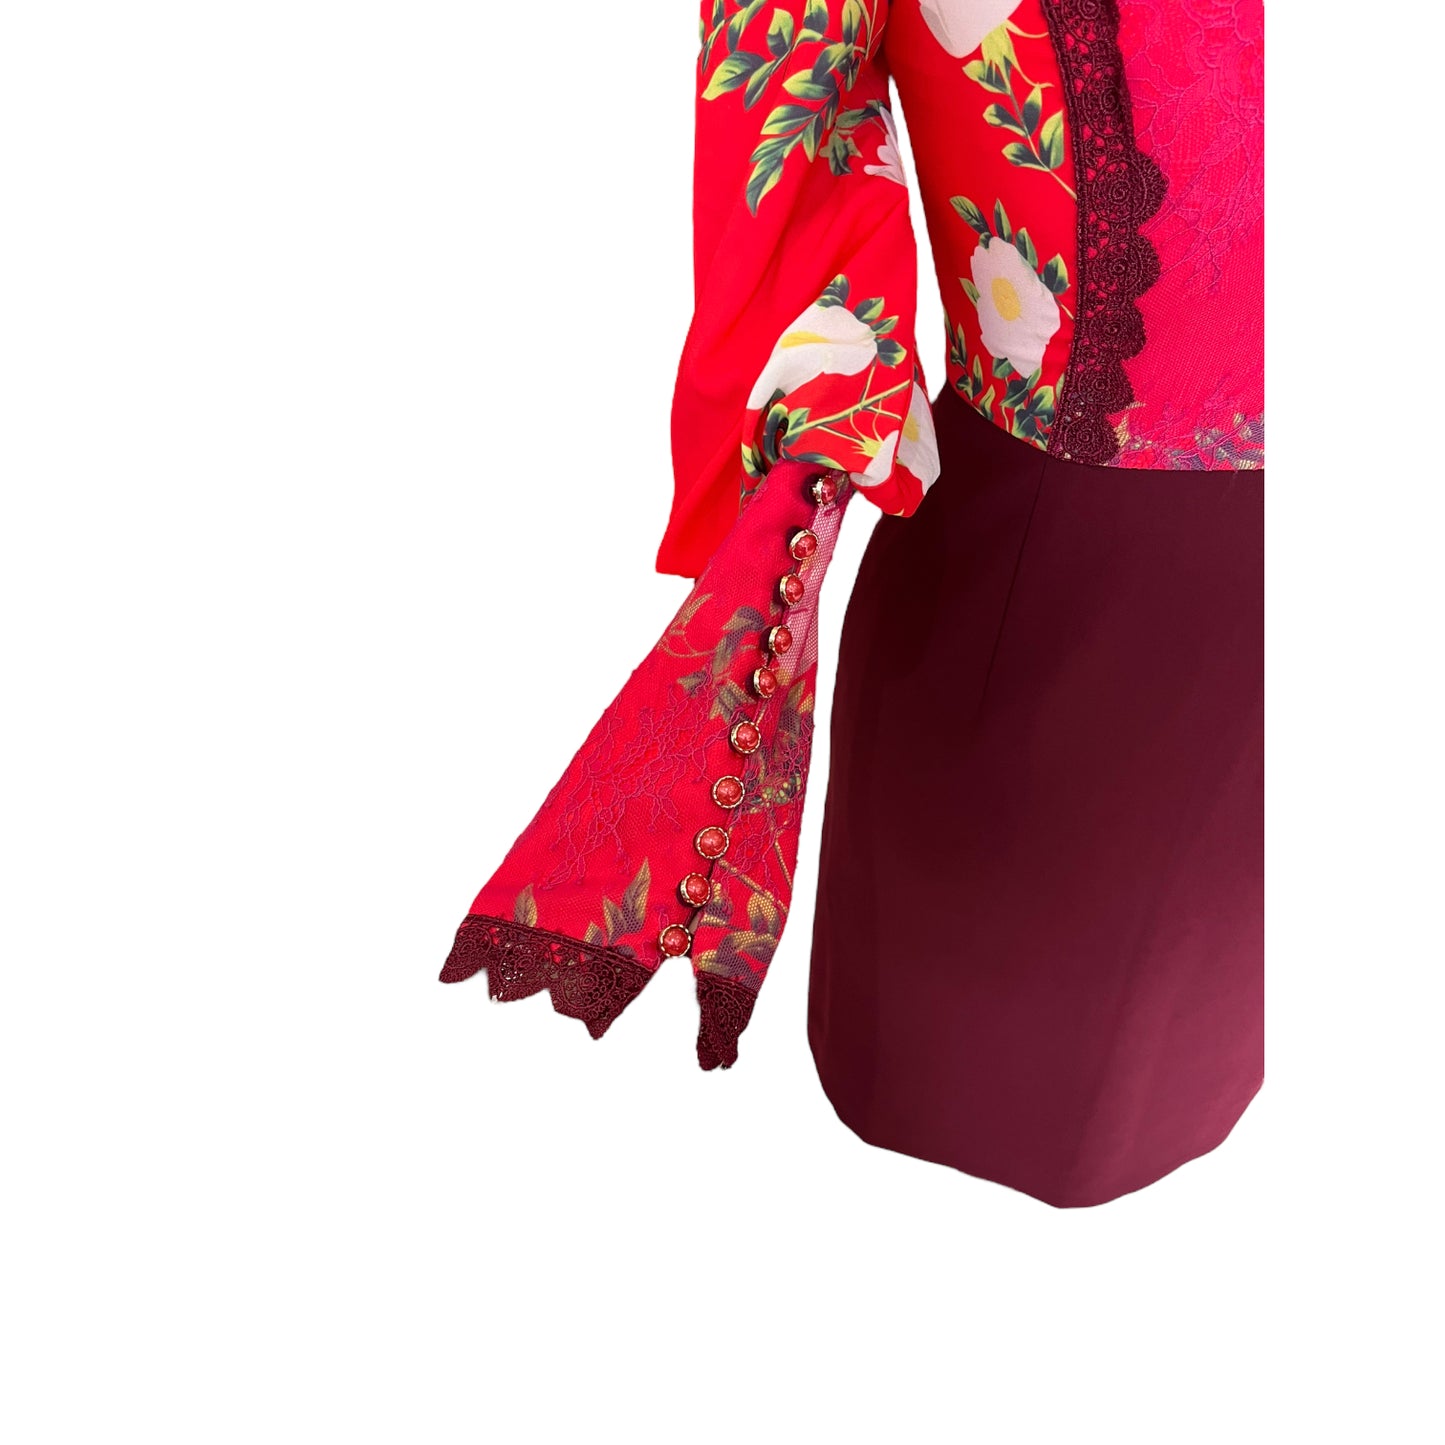 Comino Couture Red and Burgundy Lace Dress